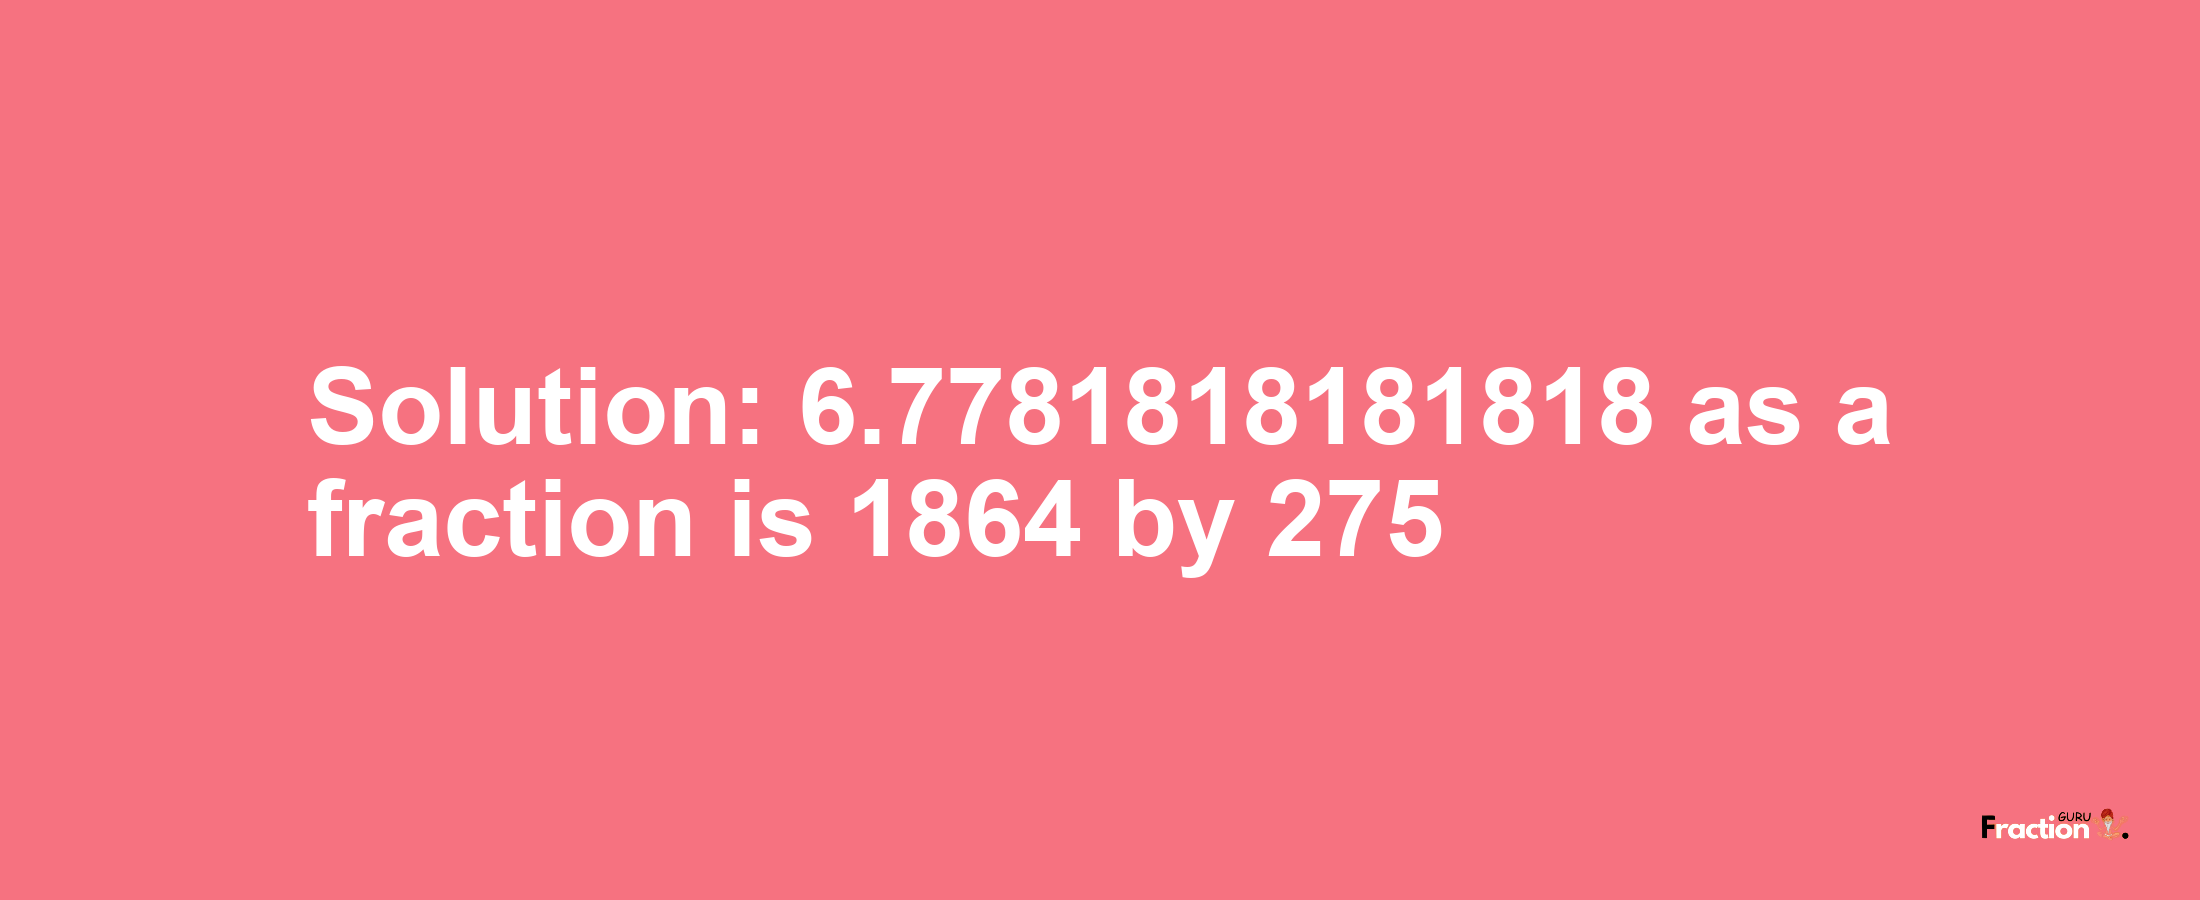 Solution:6.7781818181818 as a fraction is 1864/275